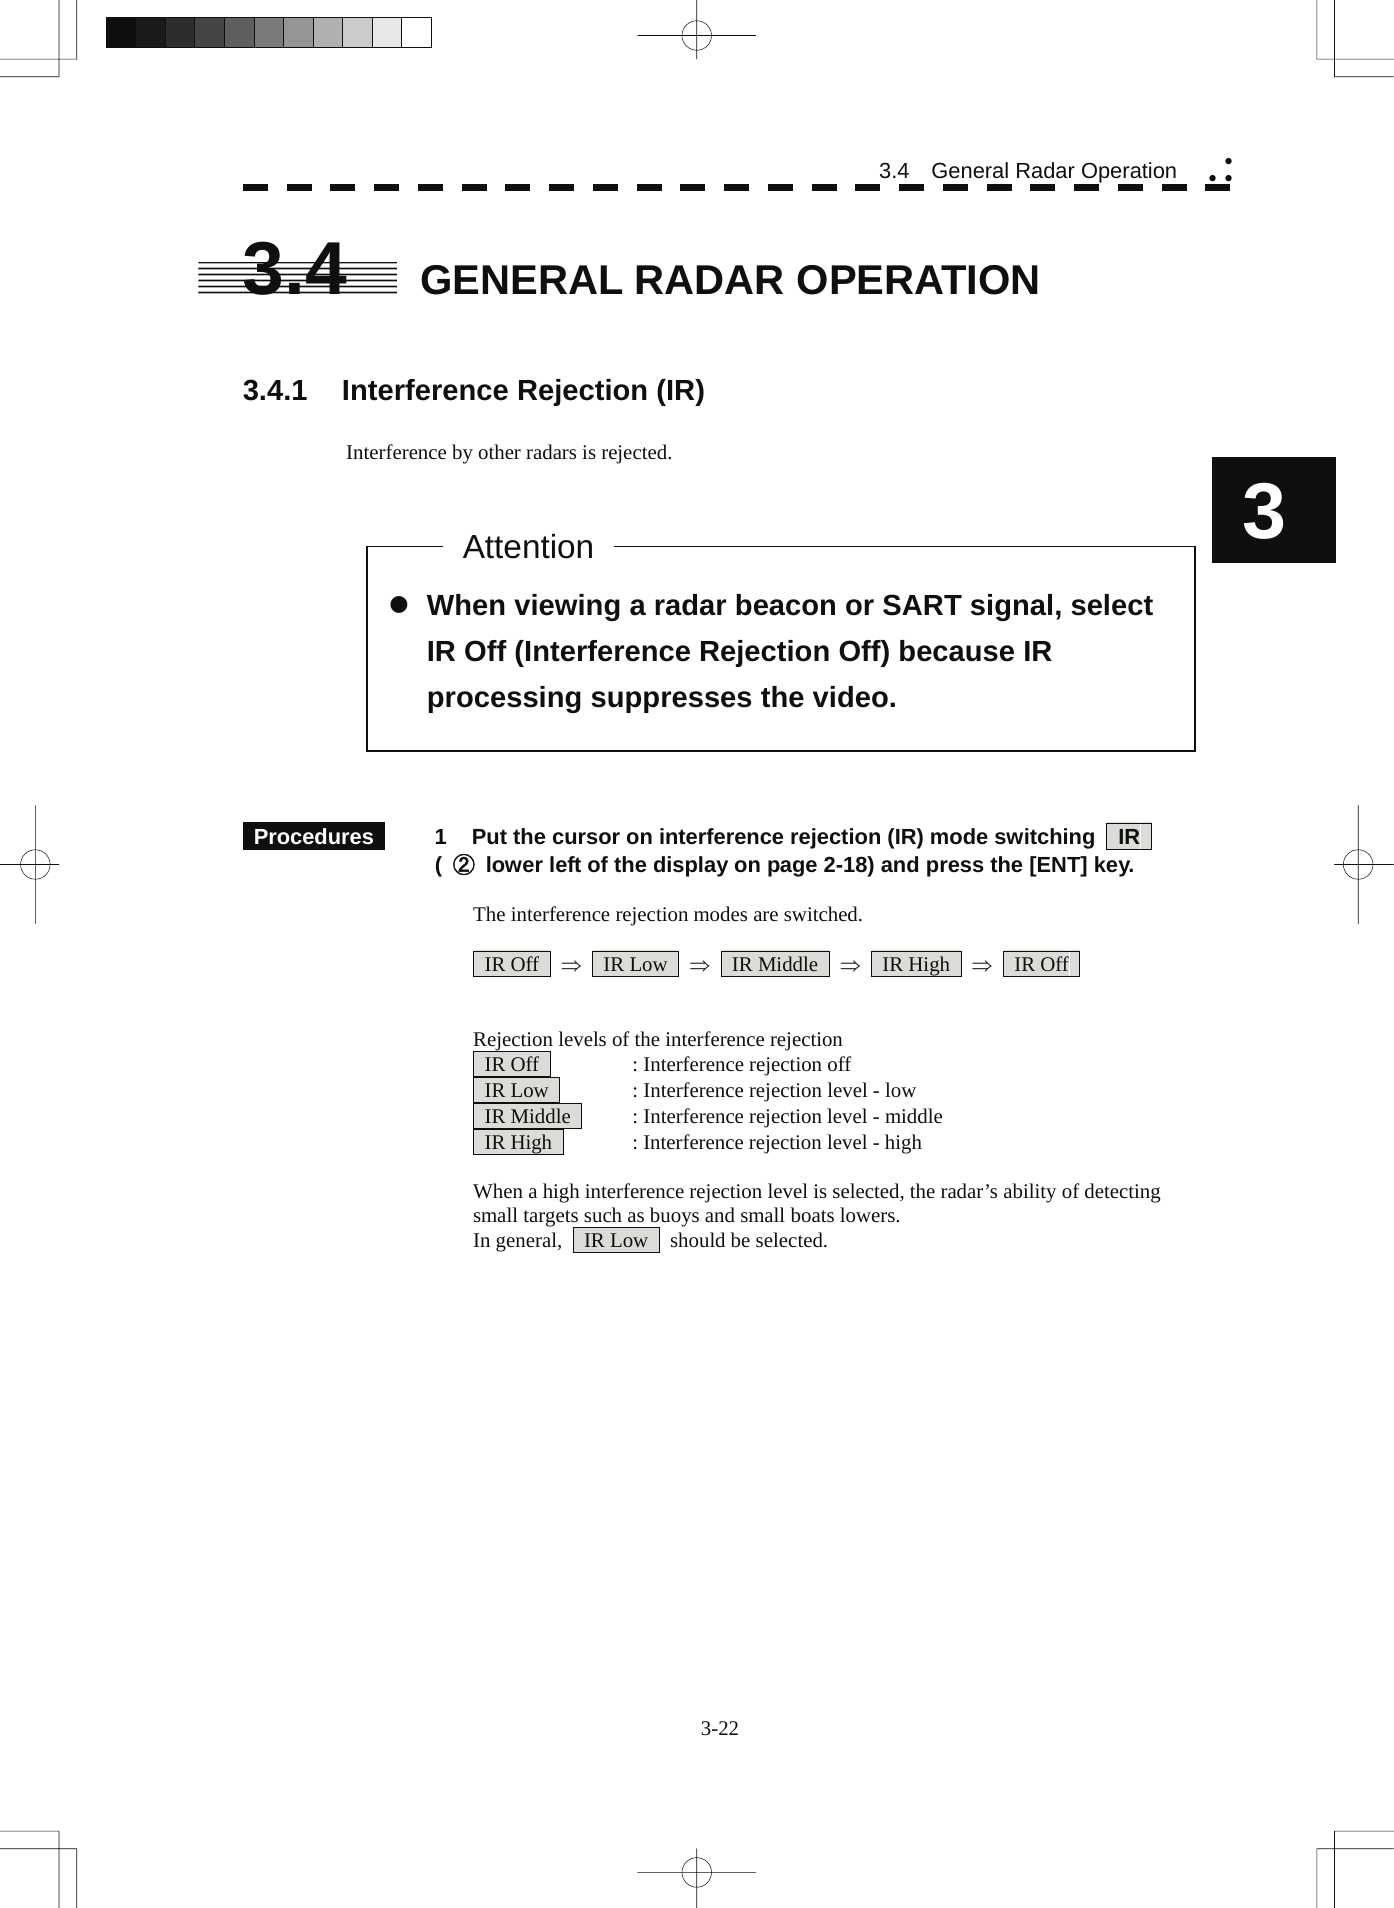  3-22 3.4  General Radar Operation yy y3 3.4  GENERAL RADAR OPERATION   3.4.1  Interference Rejection (IR)  Interference by other radars is rejected.                 Procedures   1  Put the cursor on interference rejection (IR) mode switching    IR    ( ②  lower left of the display on page 2-18) and press the [ENT] key.  The interference rejection modes are switched.   IR Off  ⇒  IR Low  ⇒  IR Middle  ⇒  IR High  ⇒  IR Off    Rejection levels of the interference rejection  IR Off   : Interference rejection off   IR Low    : Interference rejection level - low   IR Middle    : Interference rejection level - middle   IR High    : Interference rejection level - high  When a high interference rejection level is selected, the radar’s ability of detecting small targets such as buoys and small boats lowers. In general,    IR Low    should be selected.     z When viewing a radar beacon or SART signal, select IR Off (Interference Rejection Off) because IR processing suppresses the video. Attention 